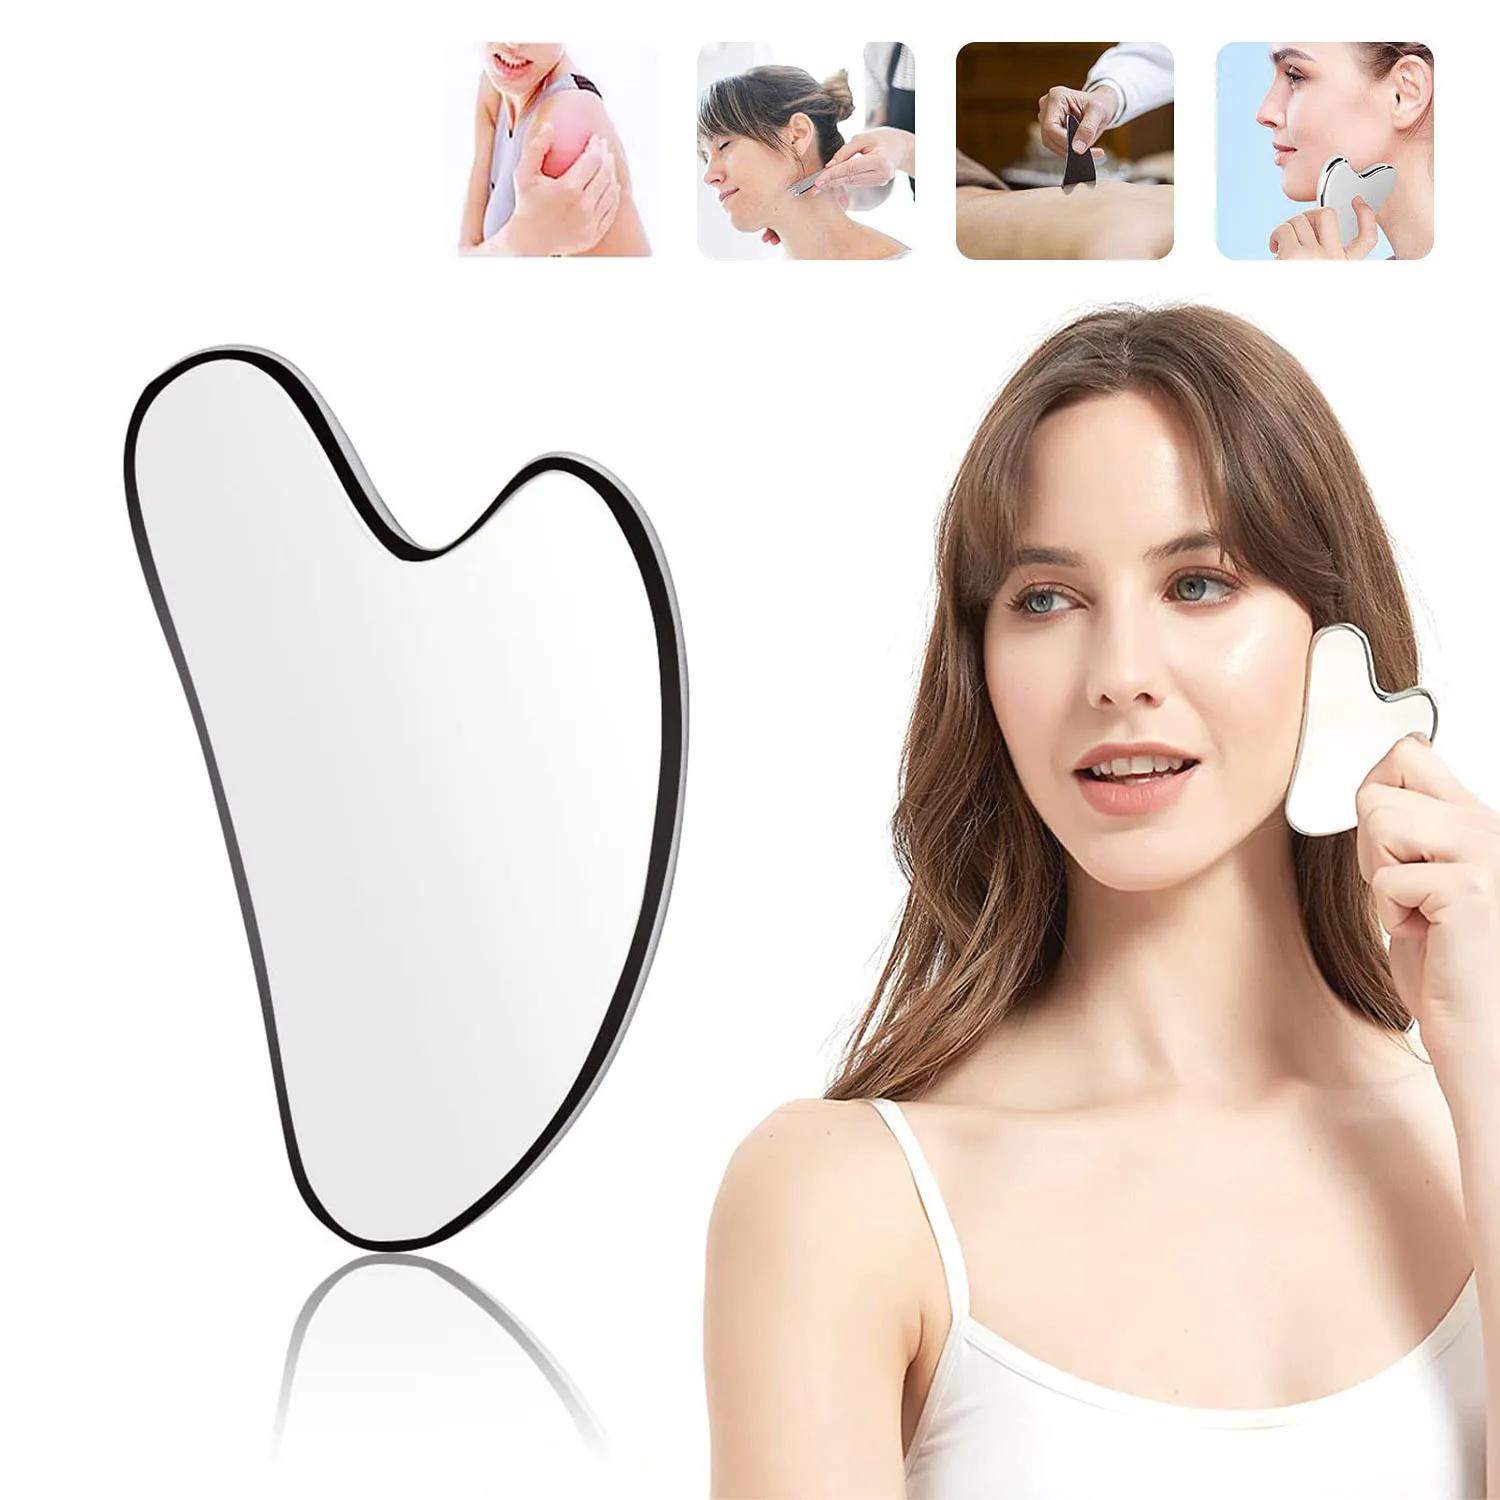 Stainless Steel Scraper Facial Massage Gua Sha Tool Face Lift Anti-Aging Skin Tightening Cooling Metal Contour Reduce Puffiness aluminum alloy t slot nut m8 t track slider sliding nut plum blossom tightening handle woodworking tool jigs screw slot fastener